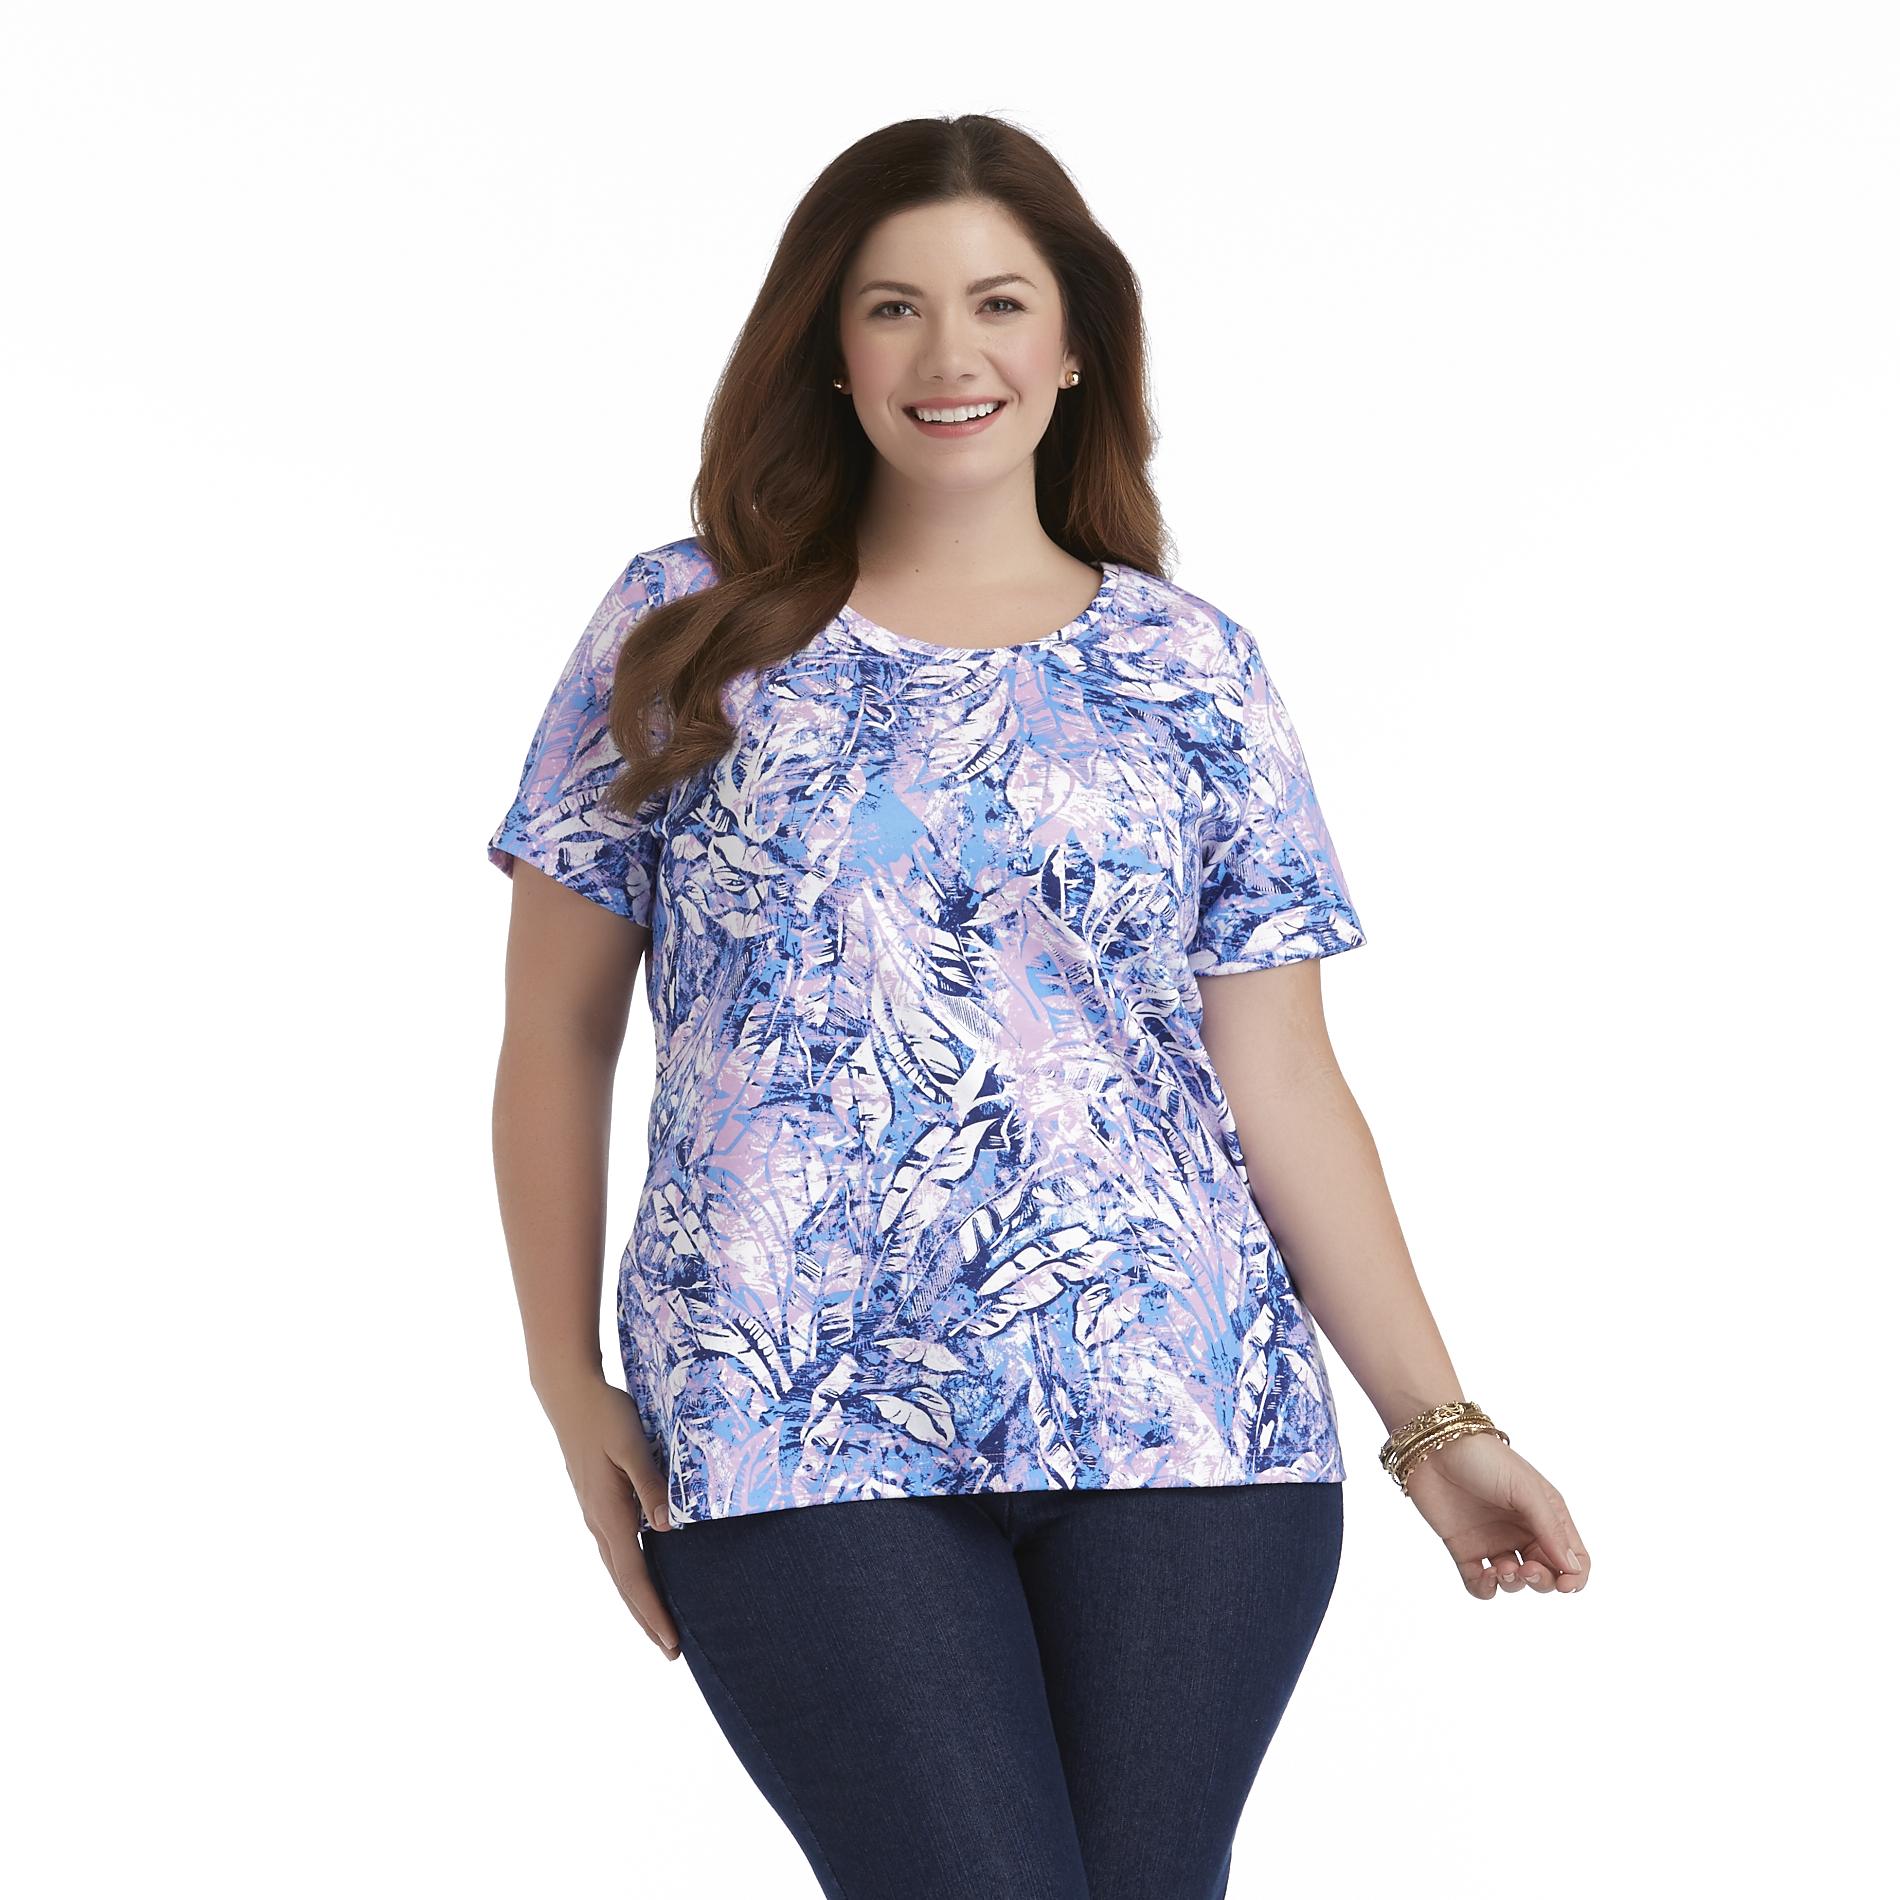 Basic Editions Women's Plus Relaxed Fit T-Shirt - Tropical Print